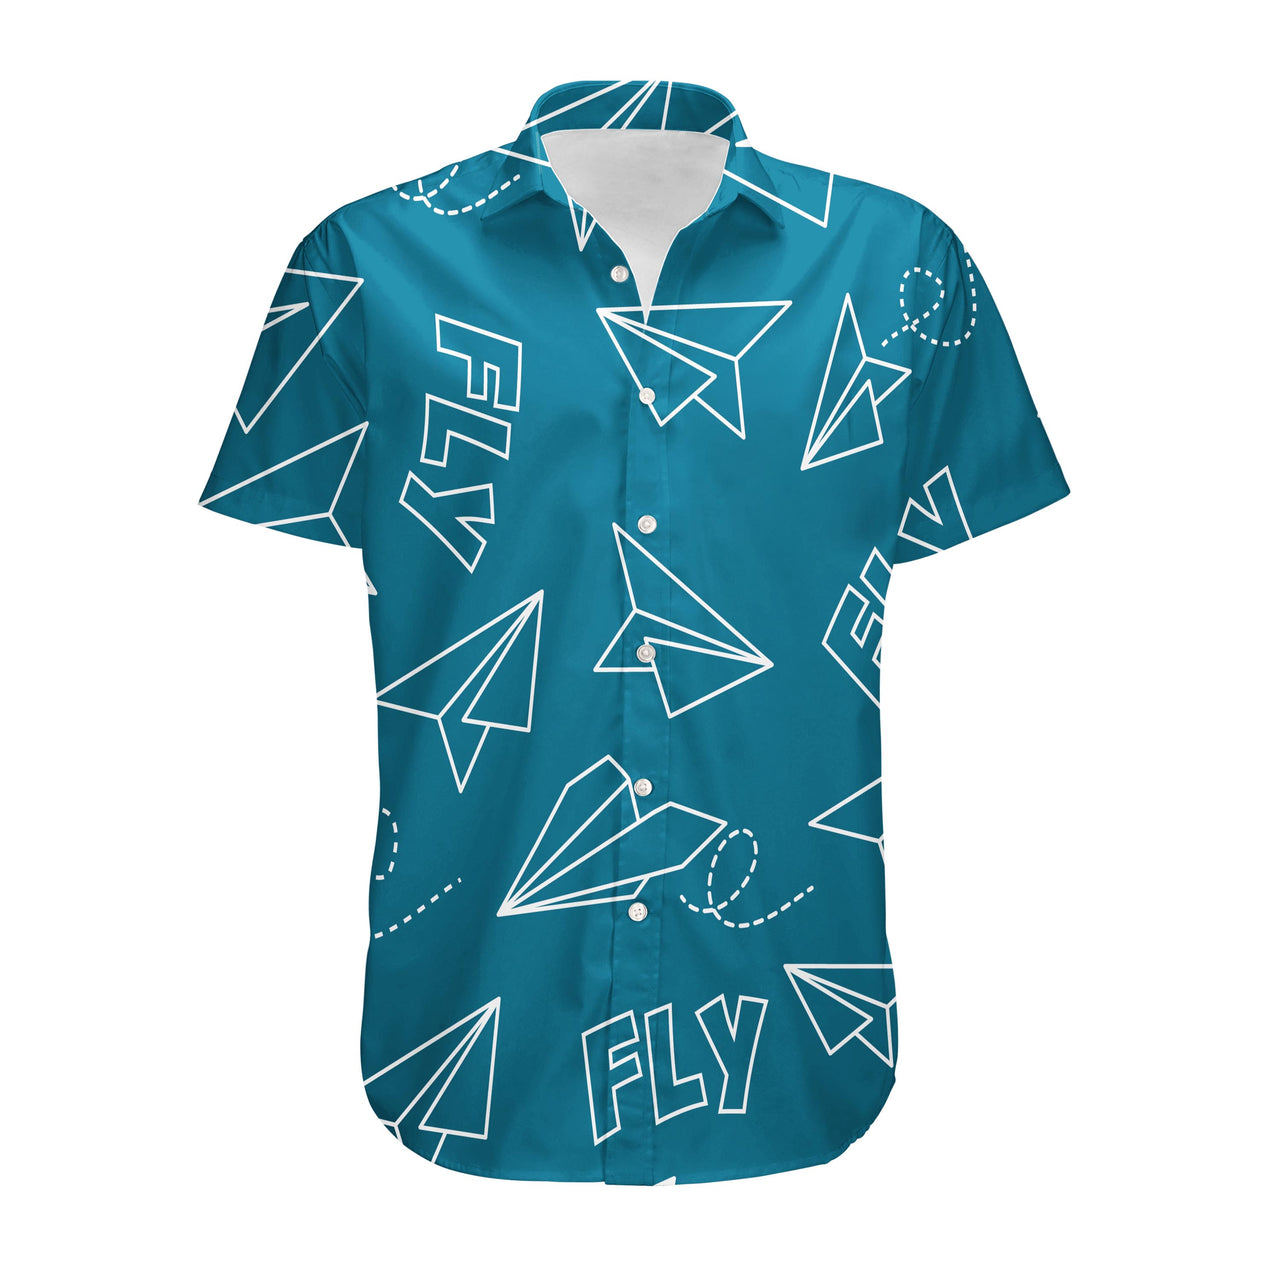 Paper Airplane & Fly Designed 3D Shirts